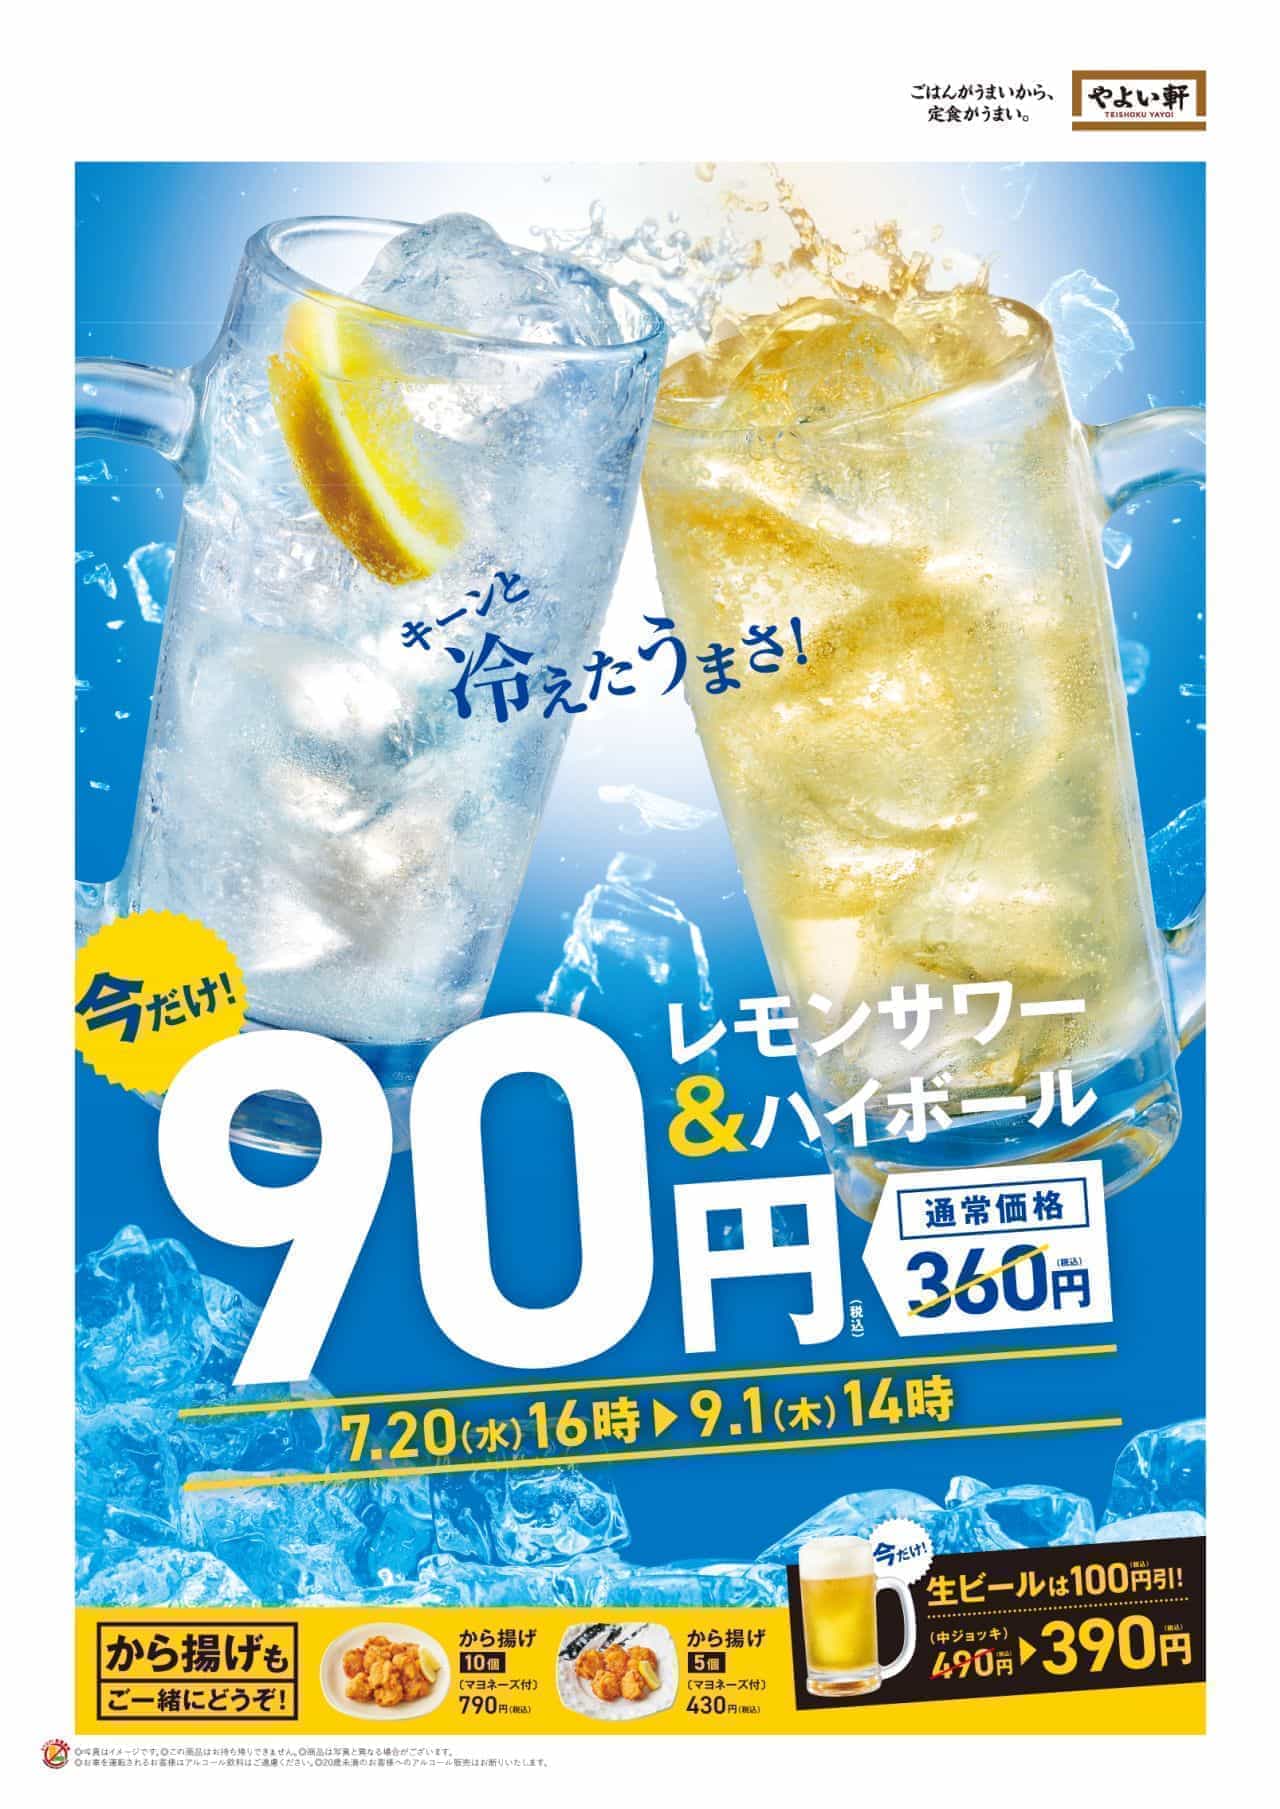 Yayoiken "Special price for alcoholic drinks